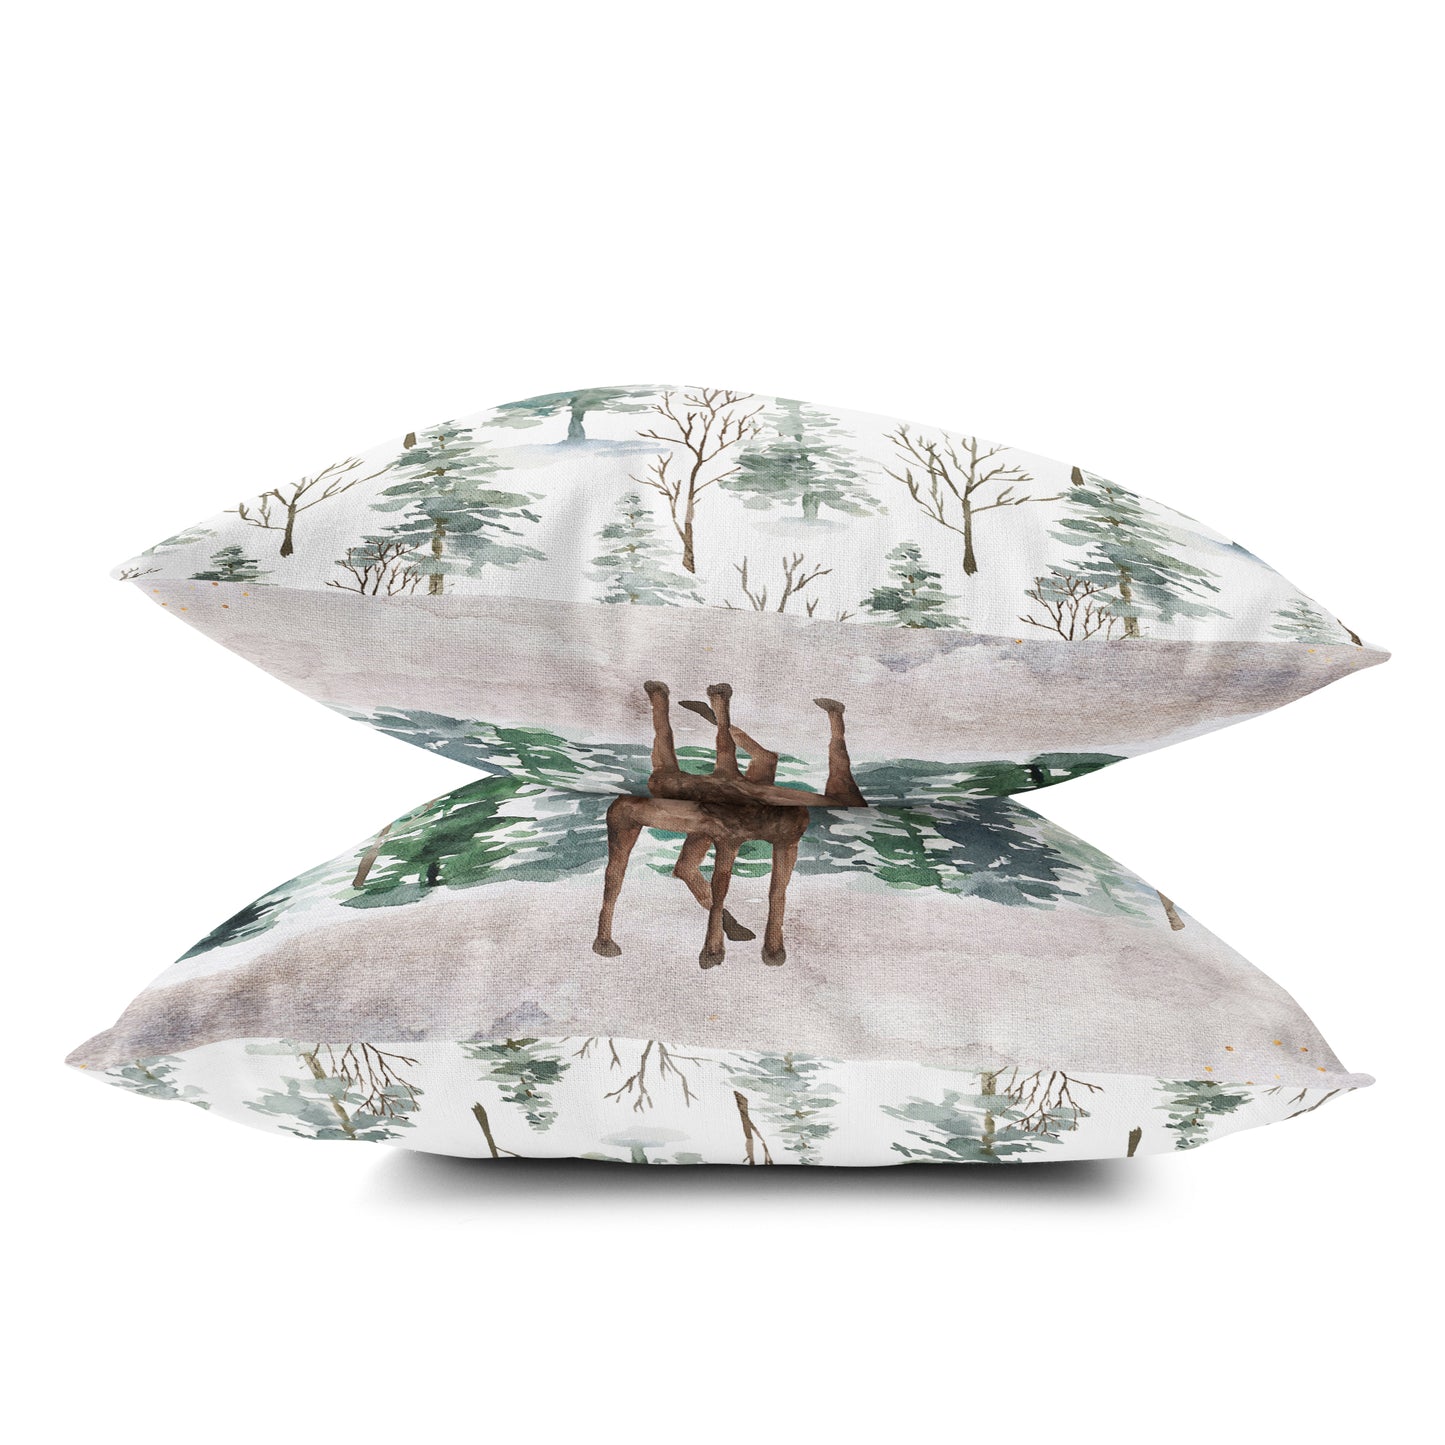 Deer Personalized Pillow, Woodland Nursery Decor - Enchanted Forest